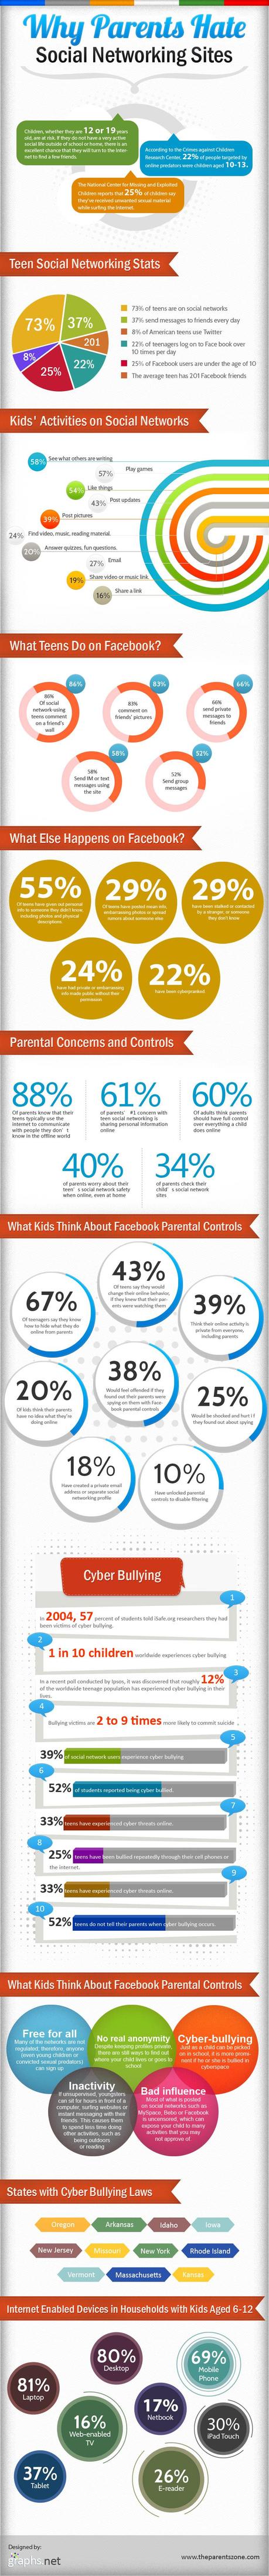 Why Parents Dislike Social Networks Infographic